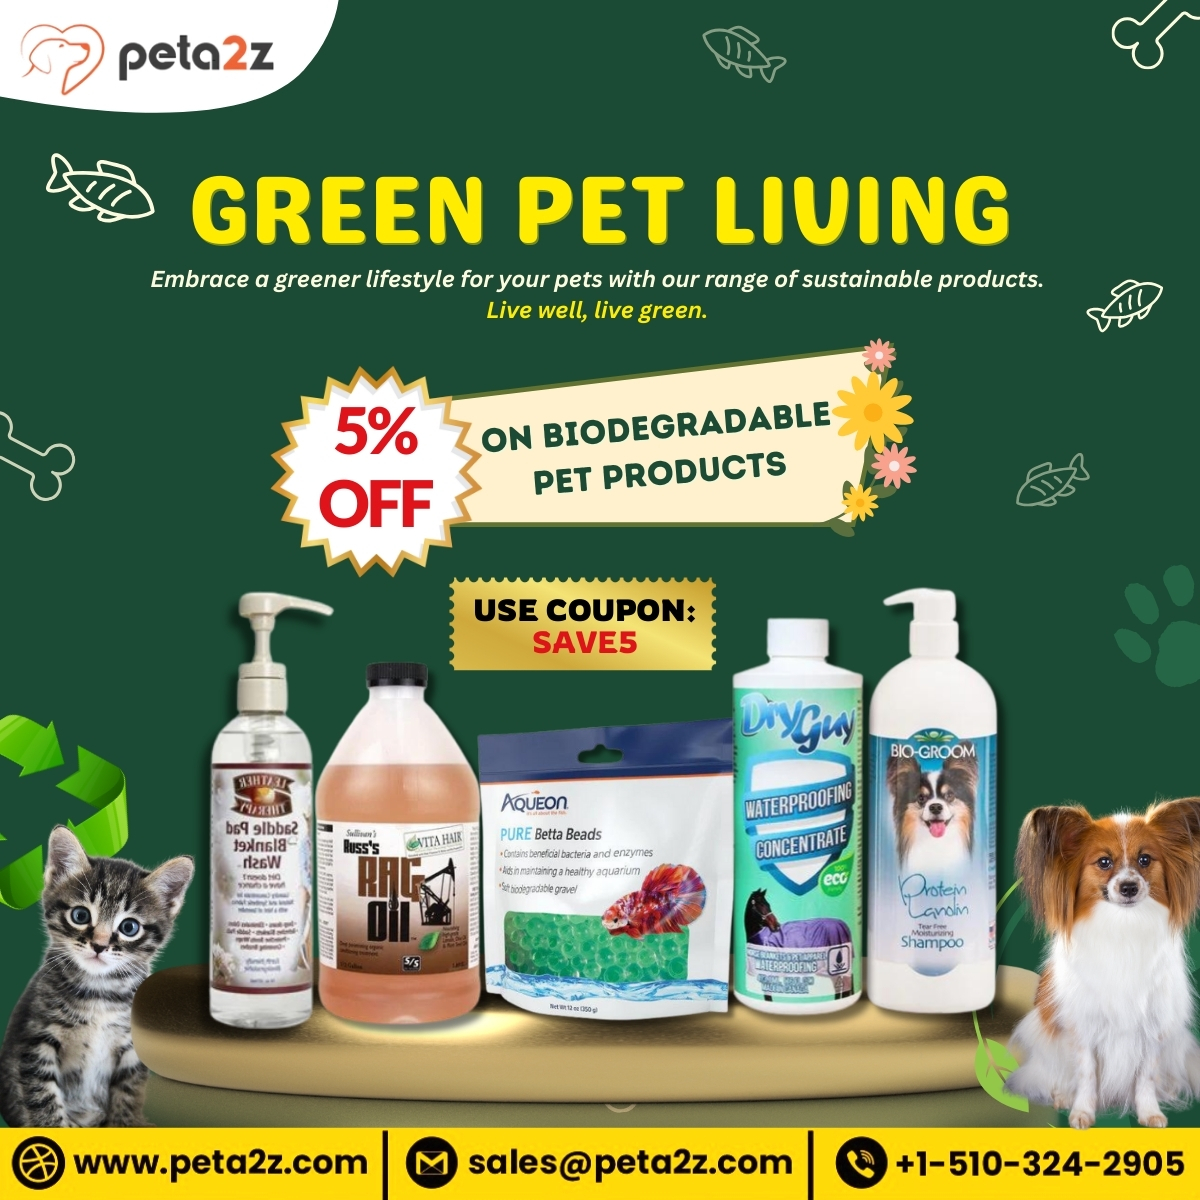 🌿🐾 Embrace a greener, healthier lifestyle for your beloved pets with Green Pet Living! 🐾🌿 Our eco-conscious products are designed to nurture your furry friends while minimizing their carbon pawprint. 🌍🐶🌱 #SustainablePets #EcoFriendlyPets 🐾🌿
bityl.co/PBCd